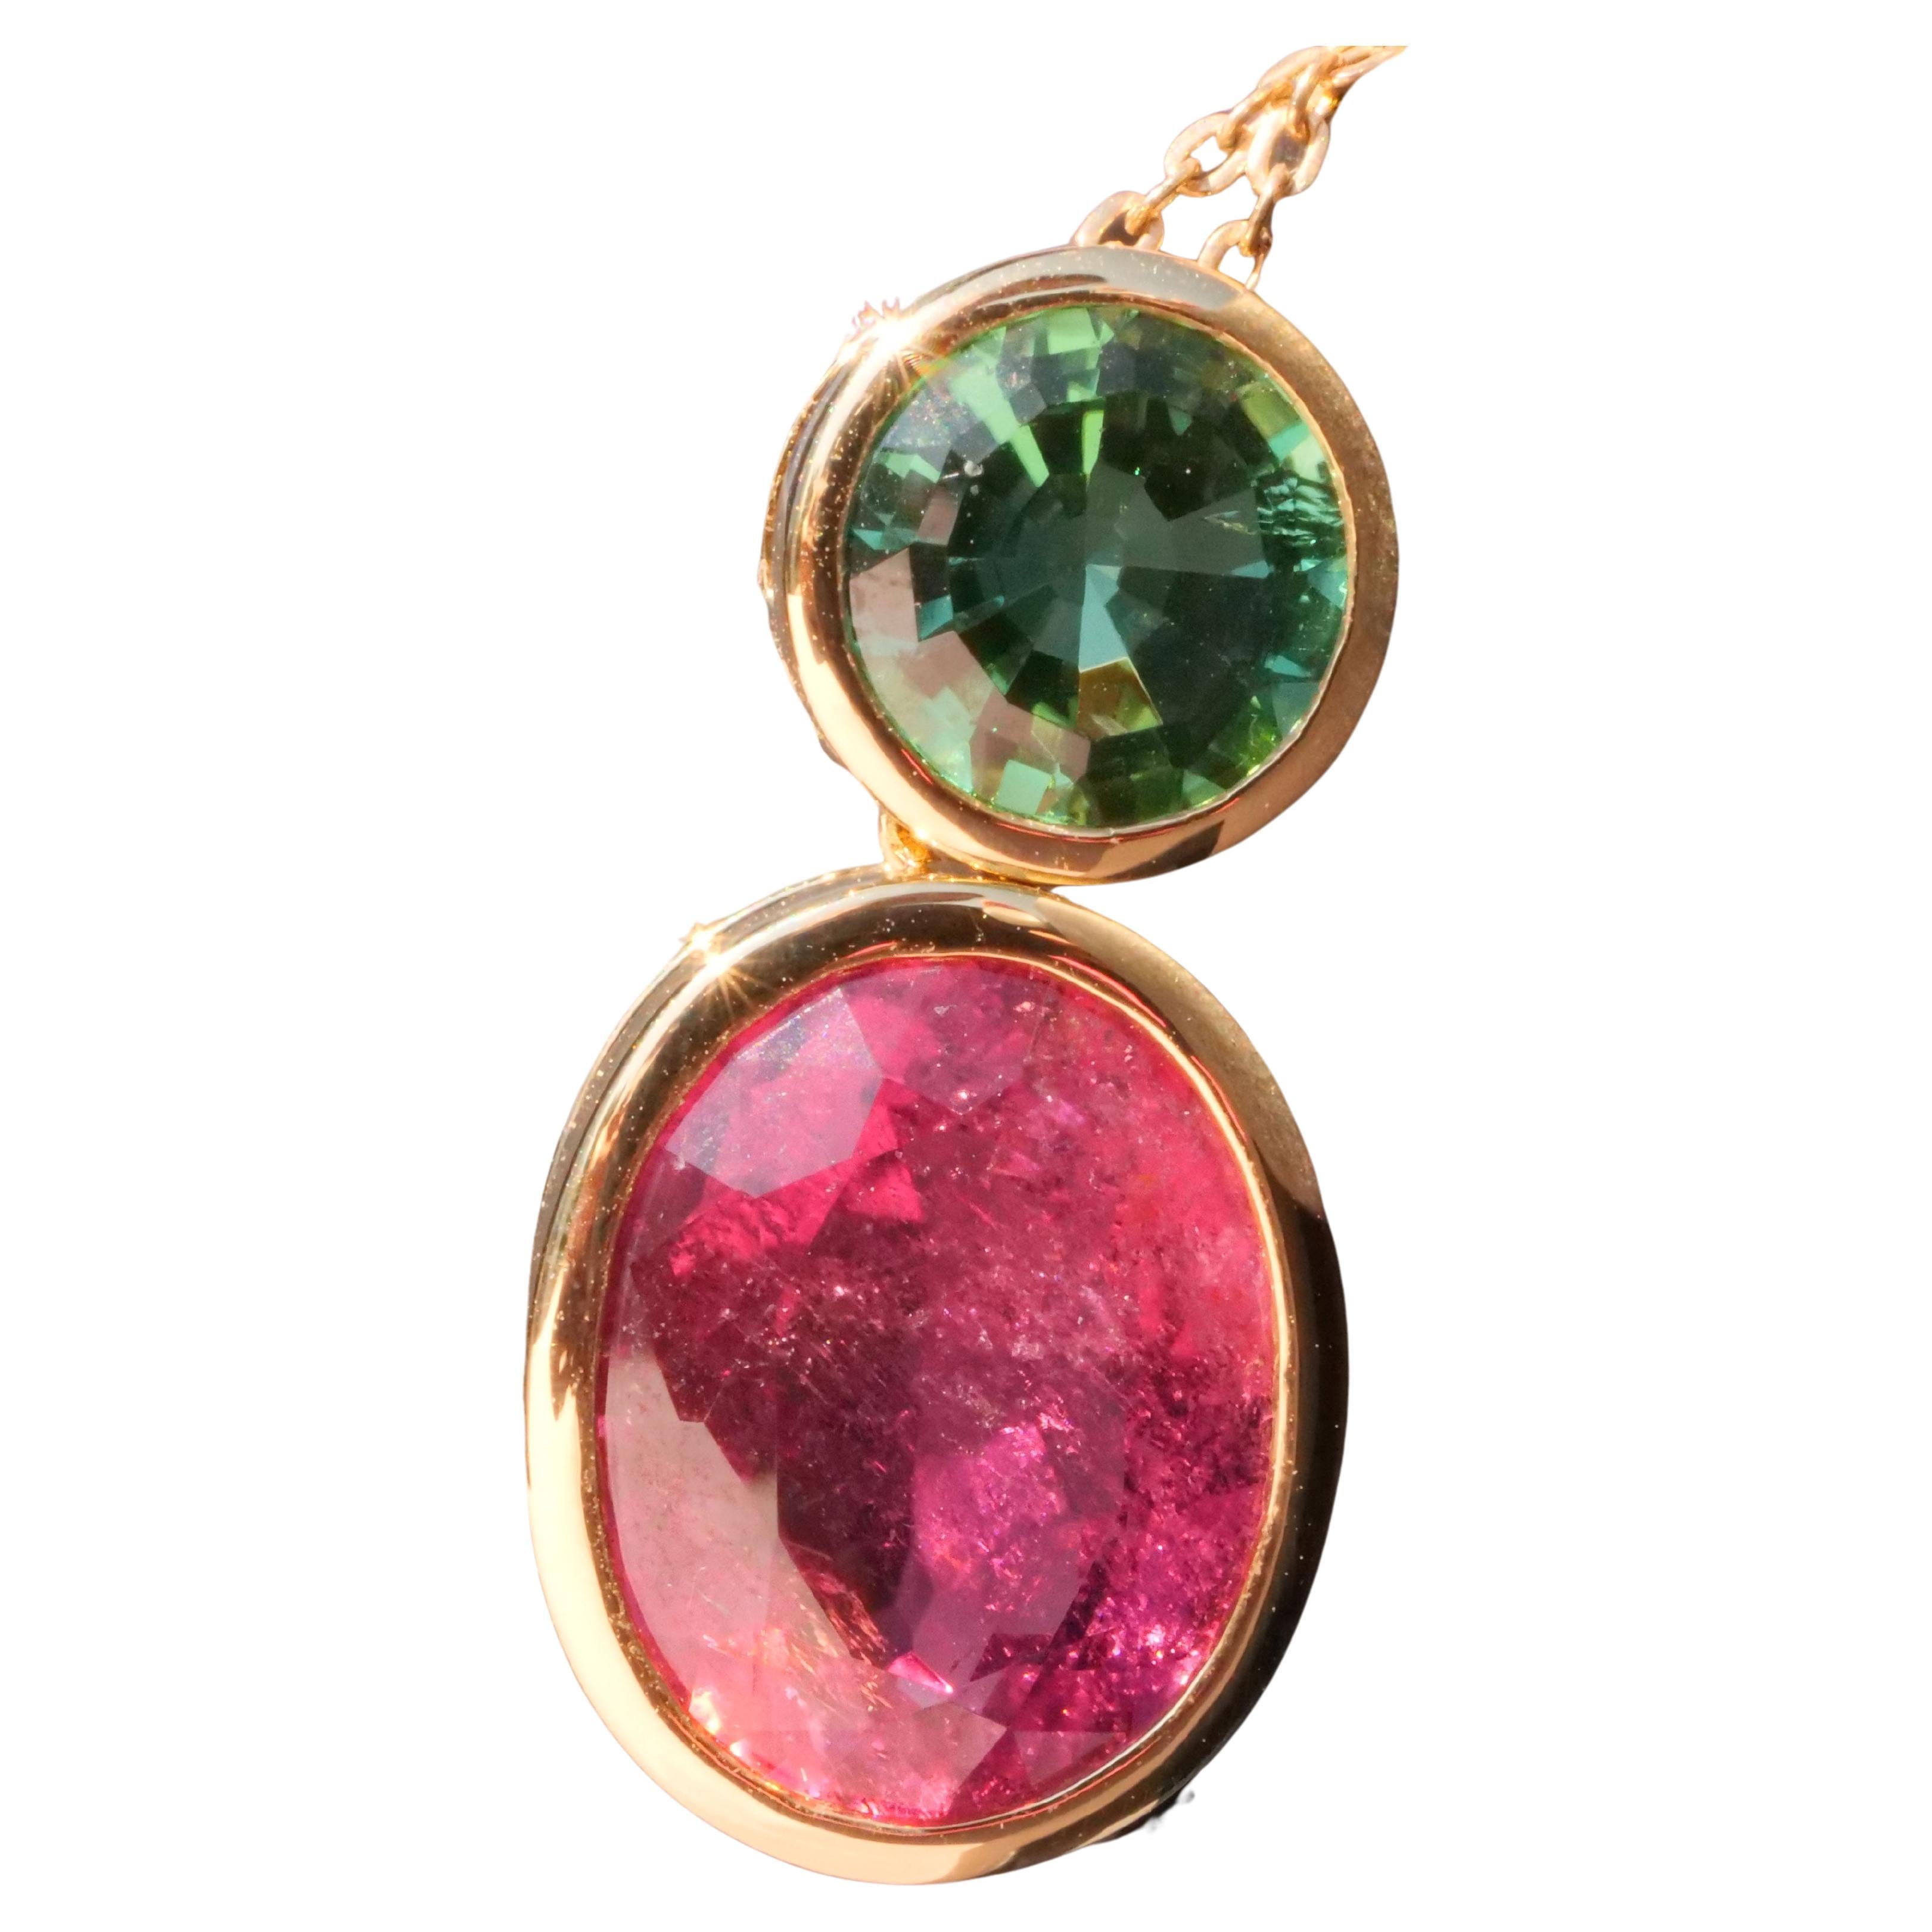 a rare color combination, electric pink and blue green and nothing else, puristic and colorful, results in a yellow gold pendant that can be worn daily, on a chain, an omega choker or with leather (inner eyelet approx. 2 x 3 mm), round faceted